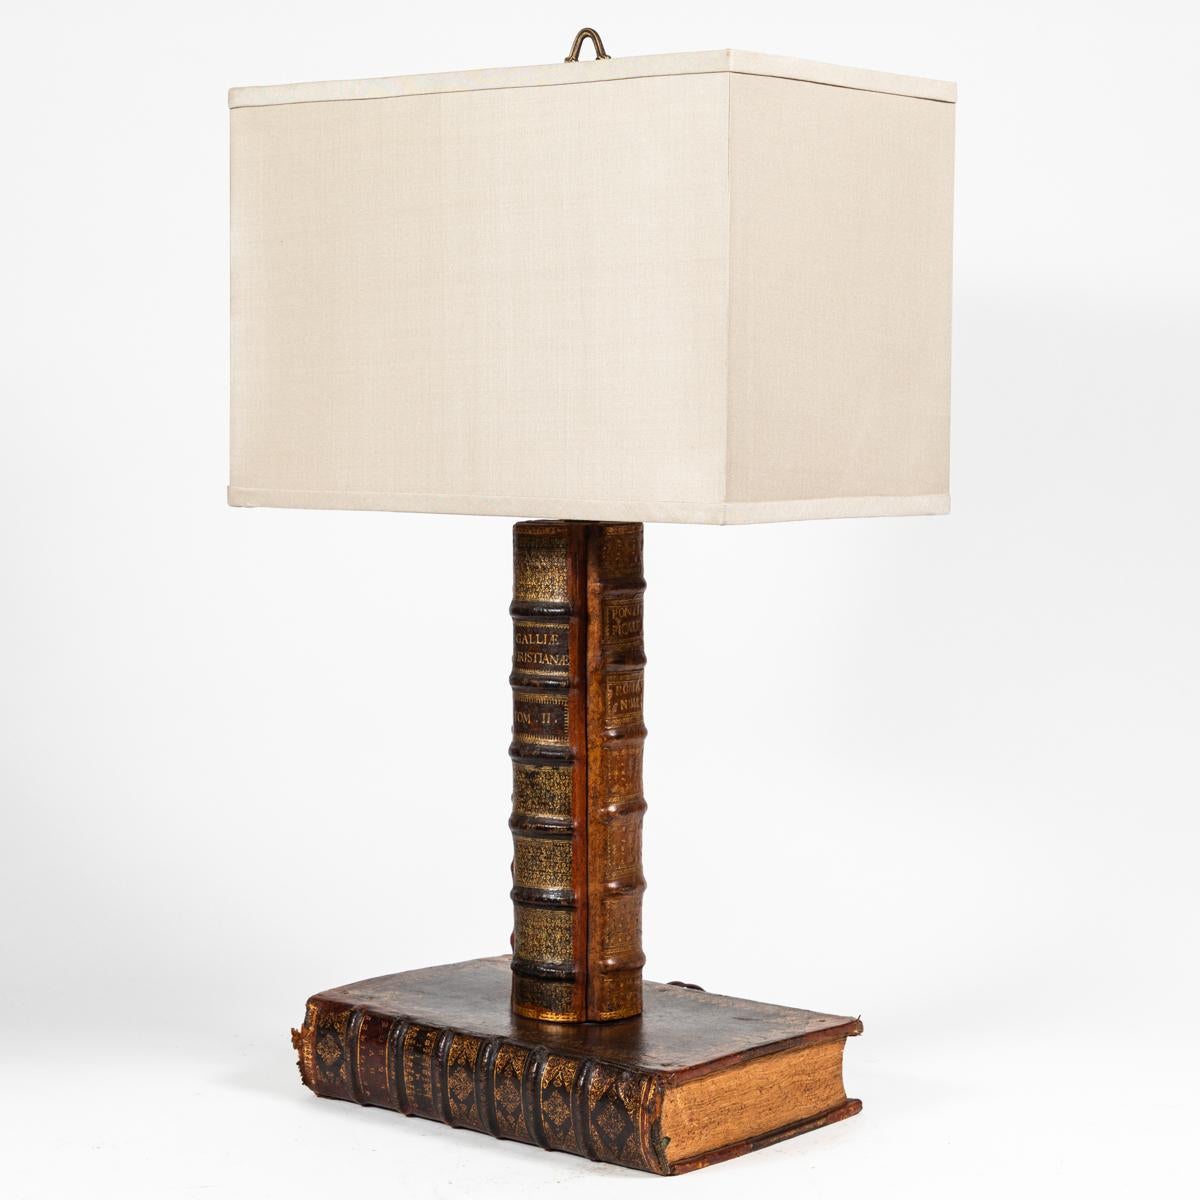 Turn-of-the-century English table lamp with unique, leather-bound book shaped base and support. A handsome yet whimsical piece, the lamp is crowned with a custom, rectangular cream-colored linen shade. Would make a perfect addition to any library or